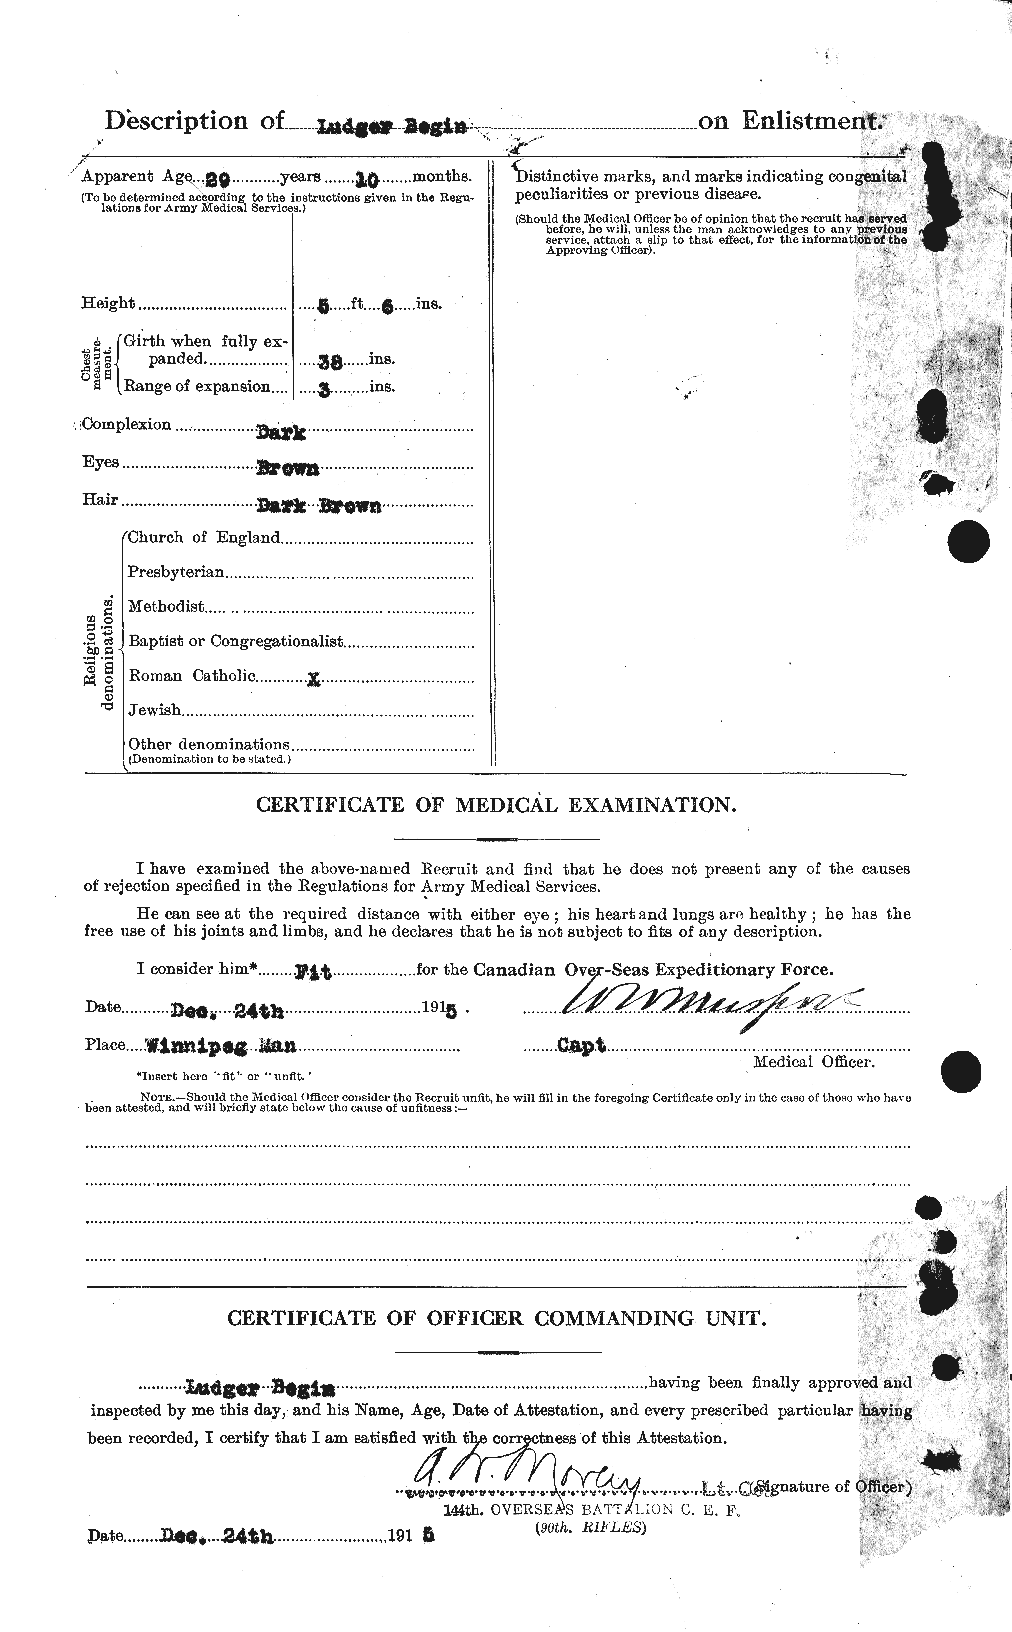 Personnel Records of the First World War - CEF 228630b